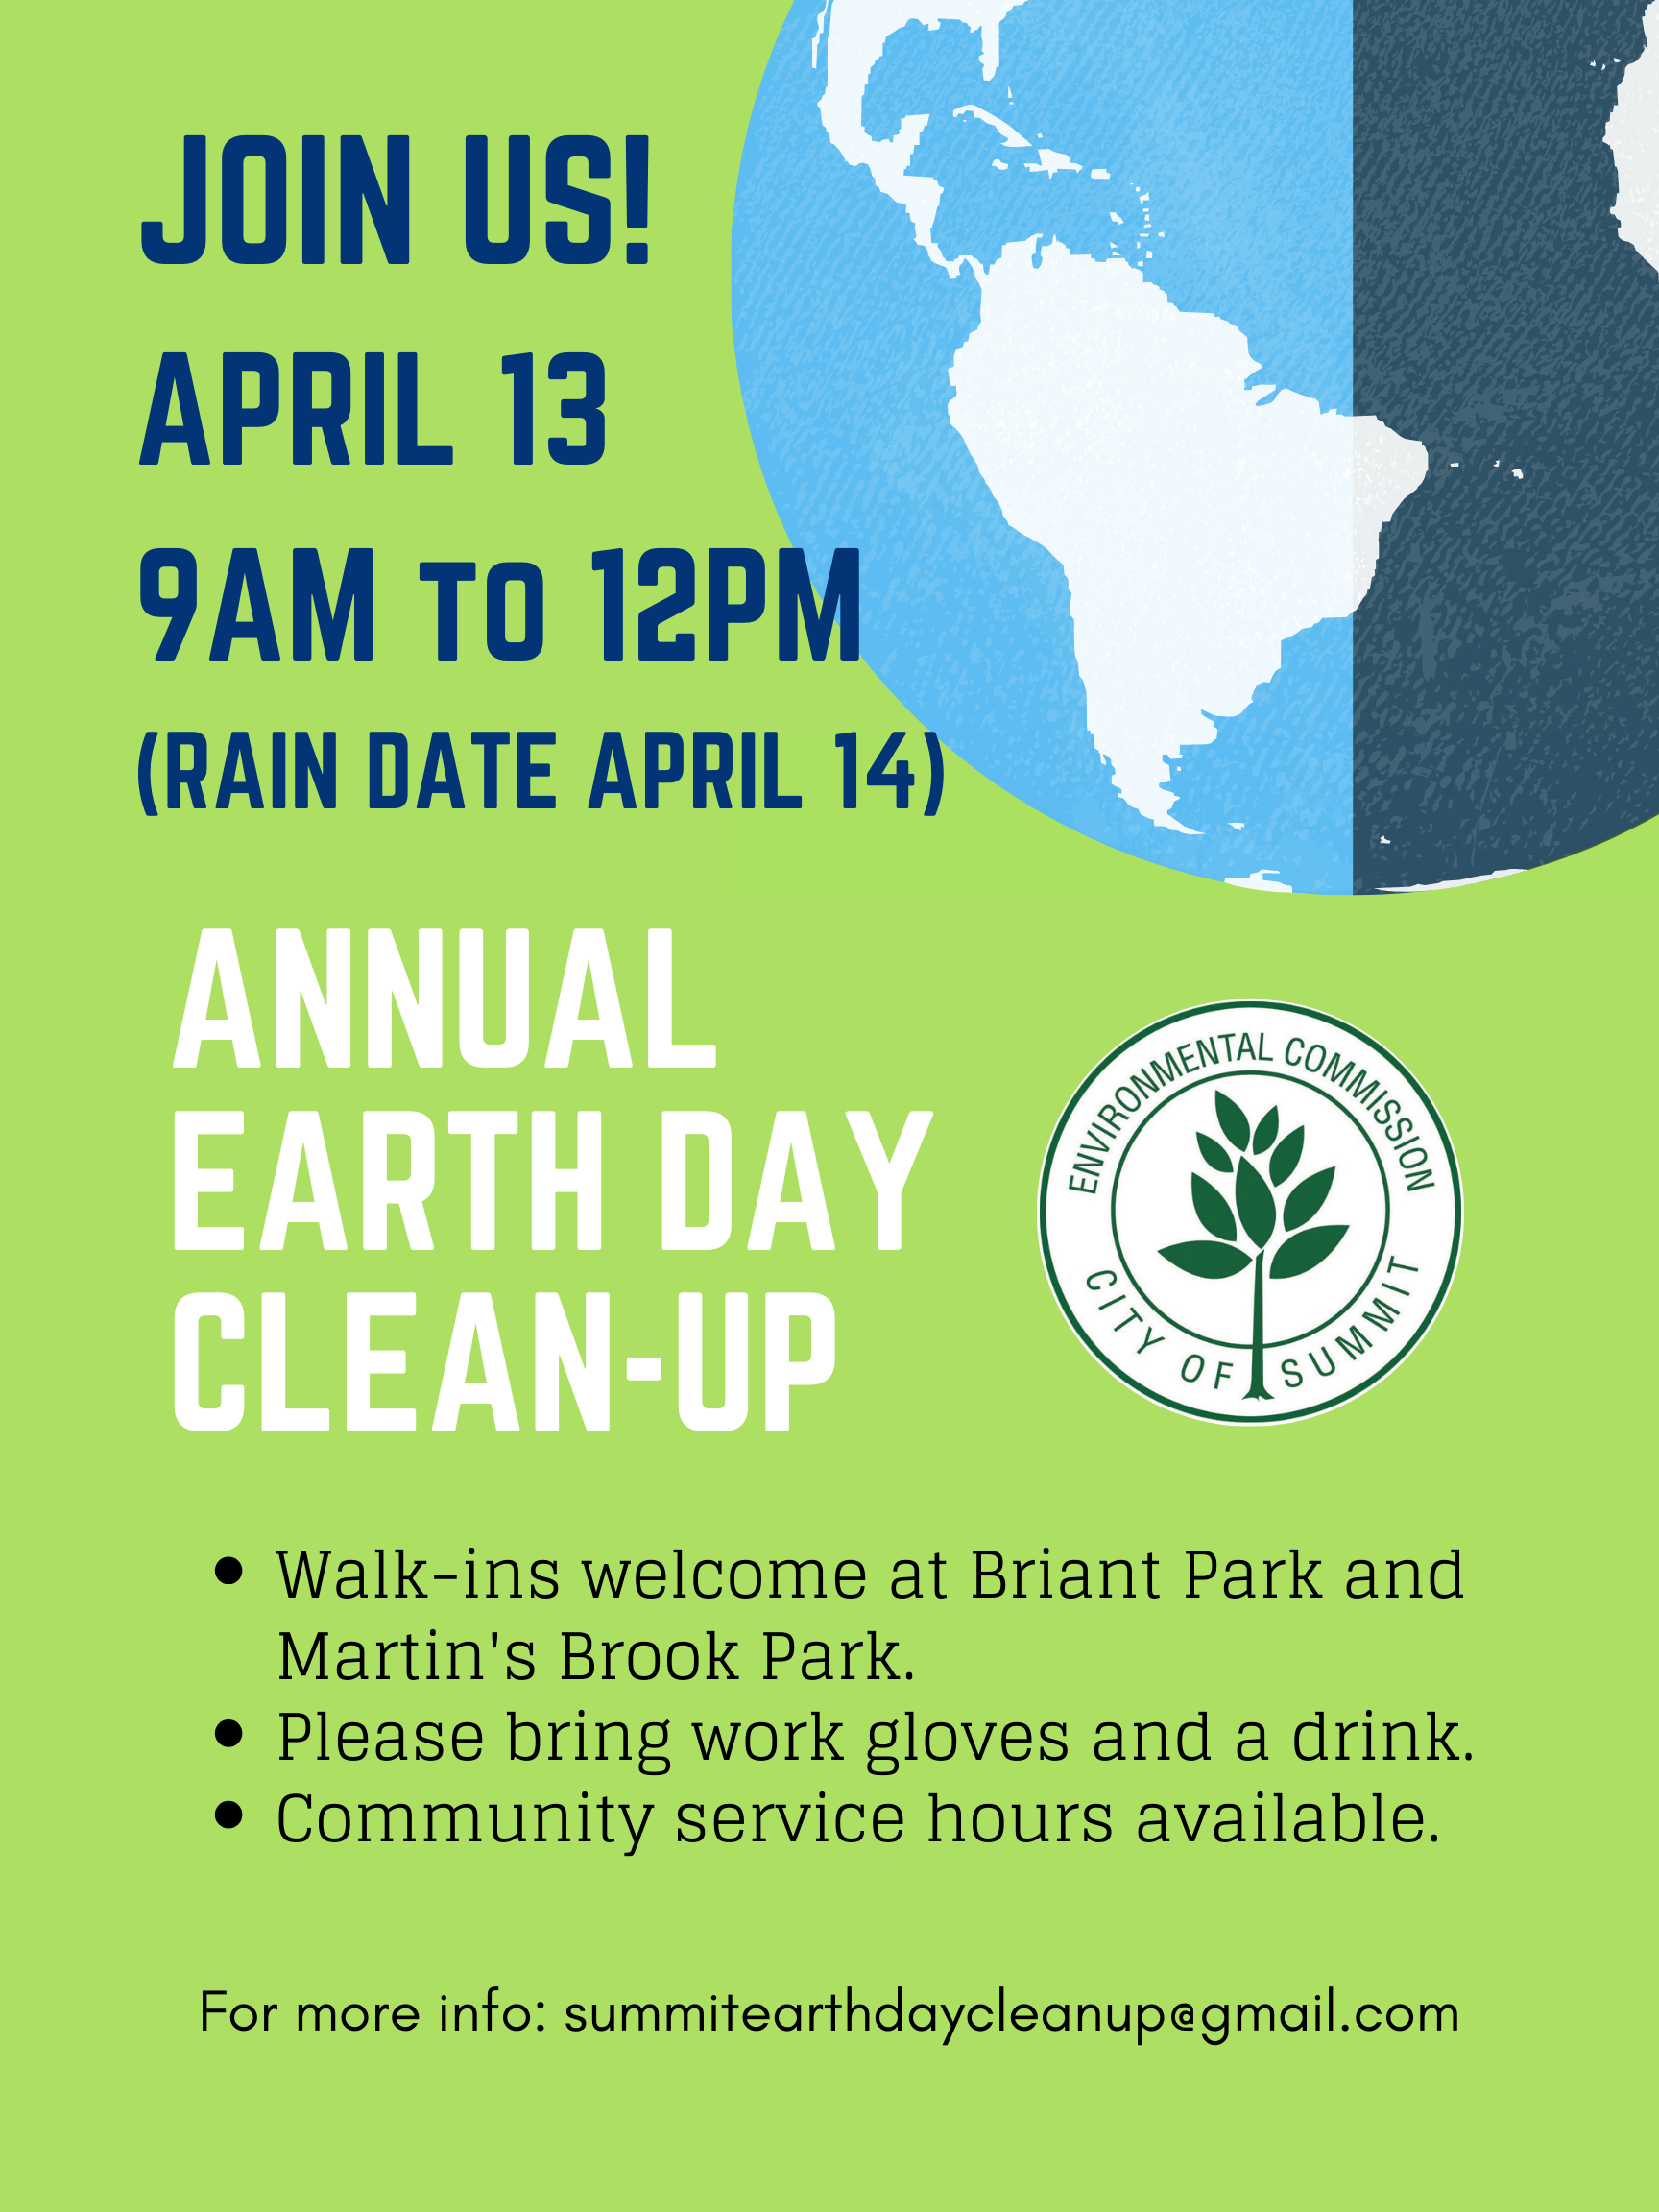 Annual Earth Day Clean-Up set for April 13th